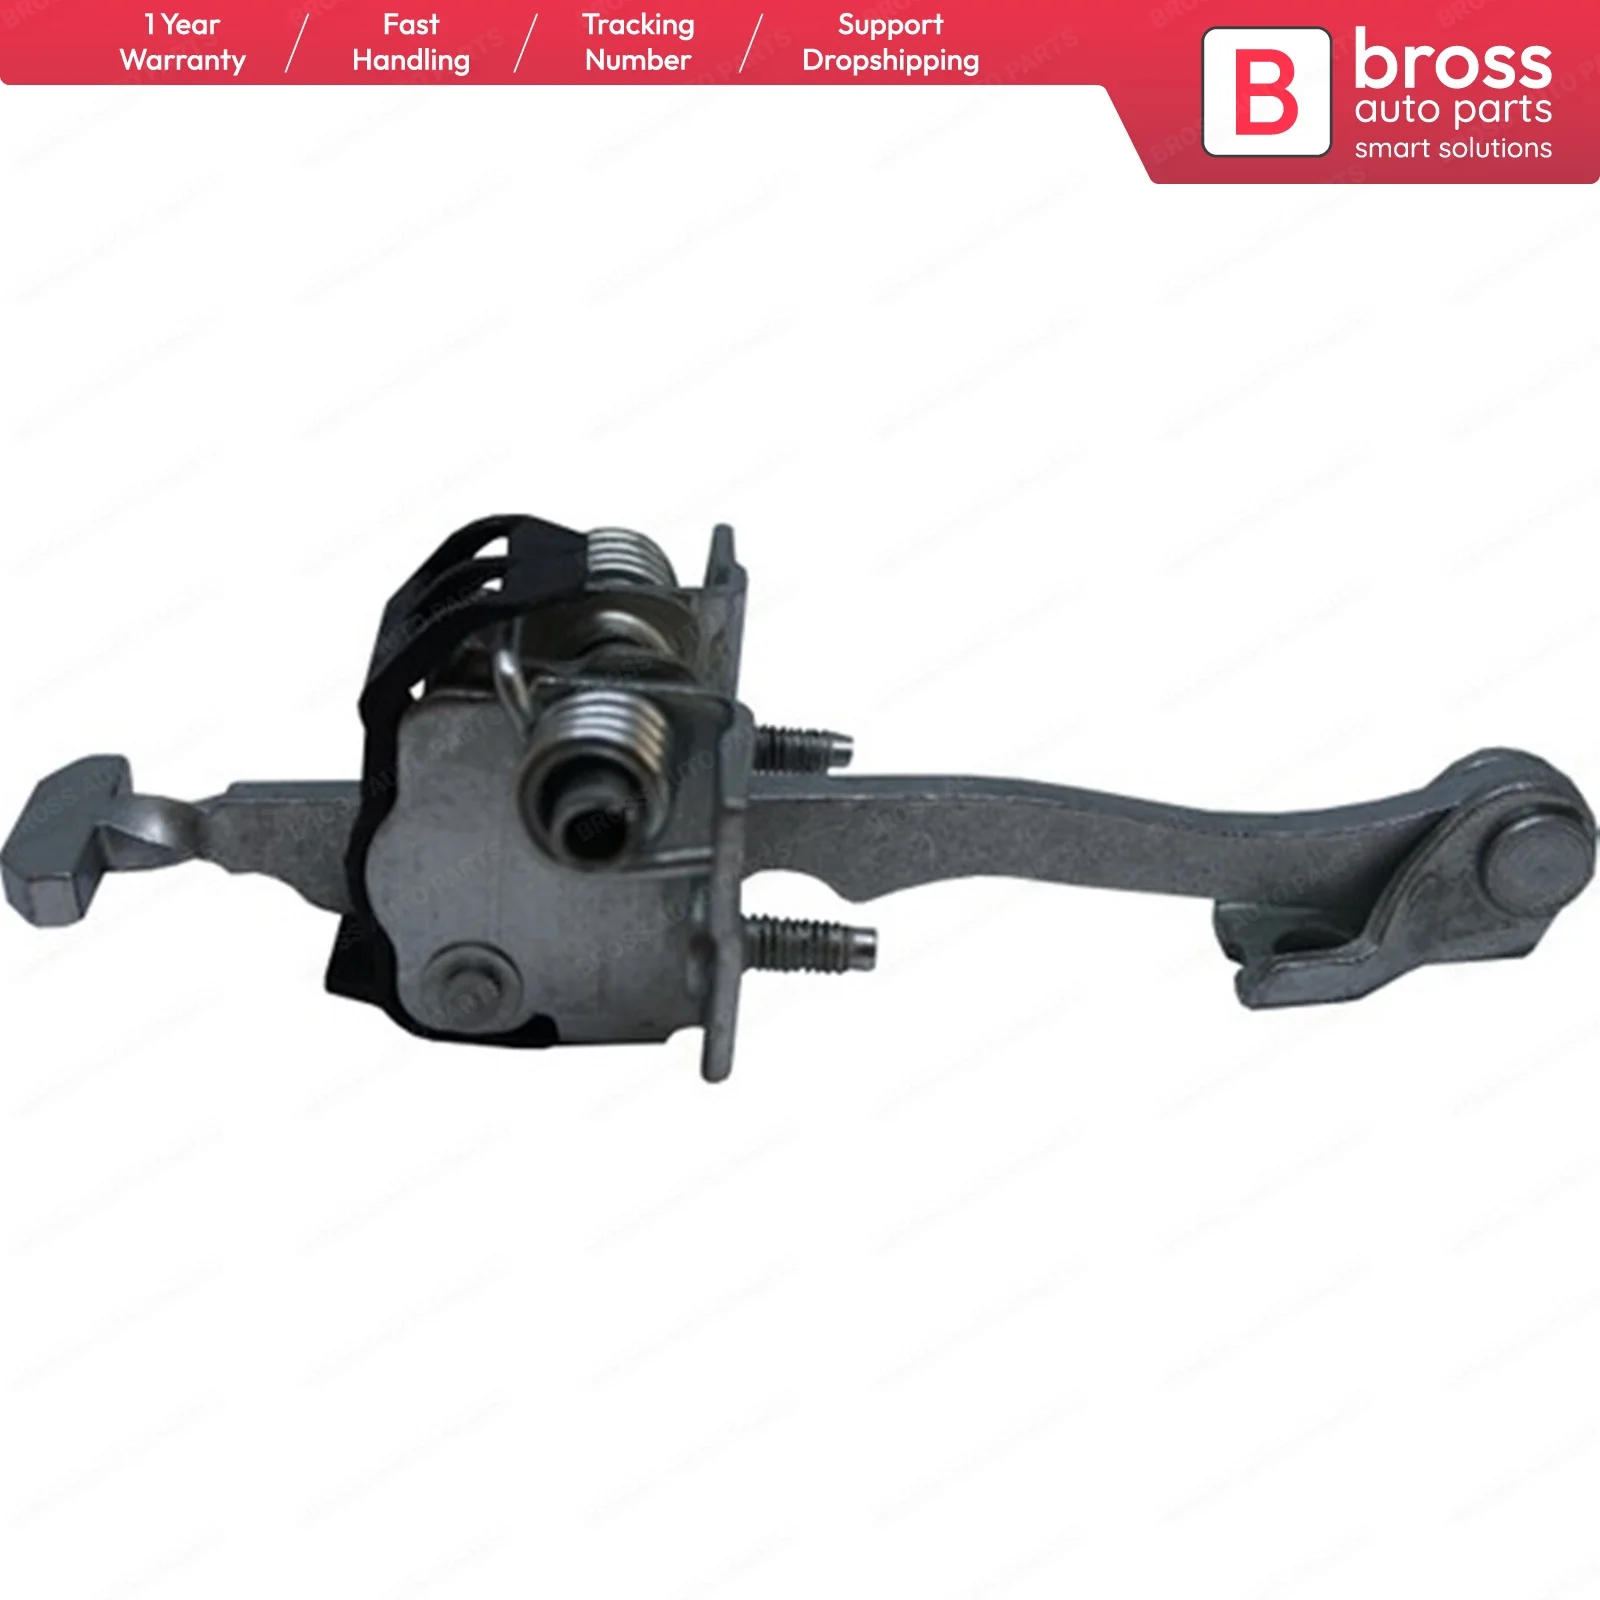 

Bross Auto Parts BDP714 Front Door Hinge Stop Check Strap Limiter 5160245 for Vauxhall Vectra B 2003-2008; Signum 2003-2008